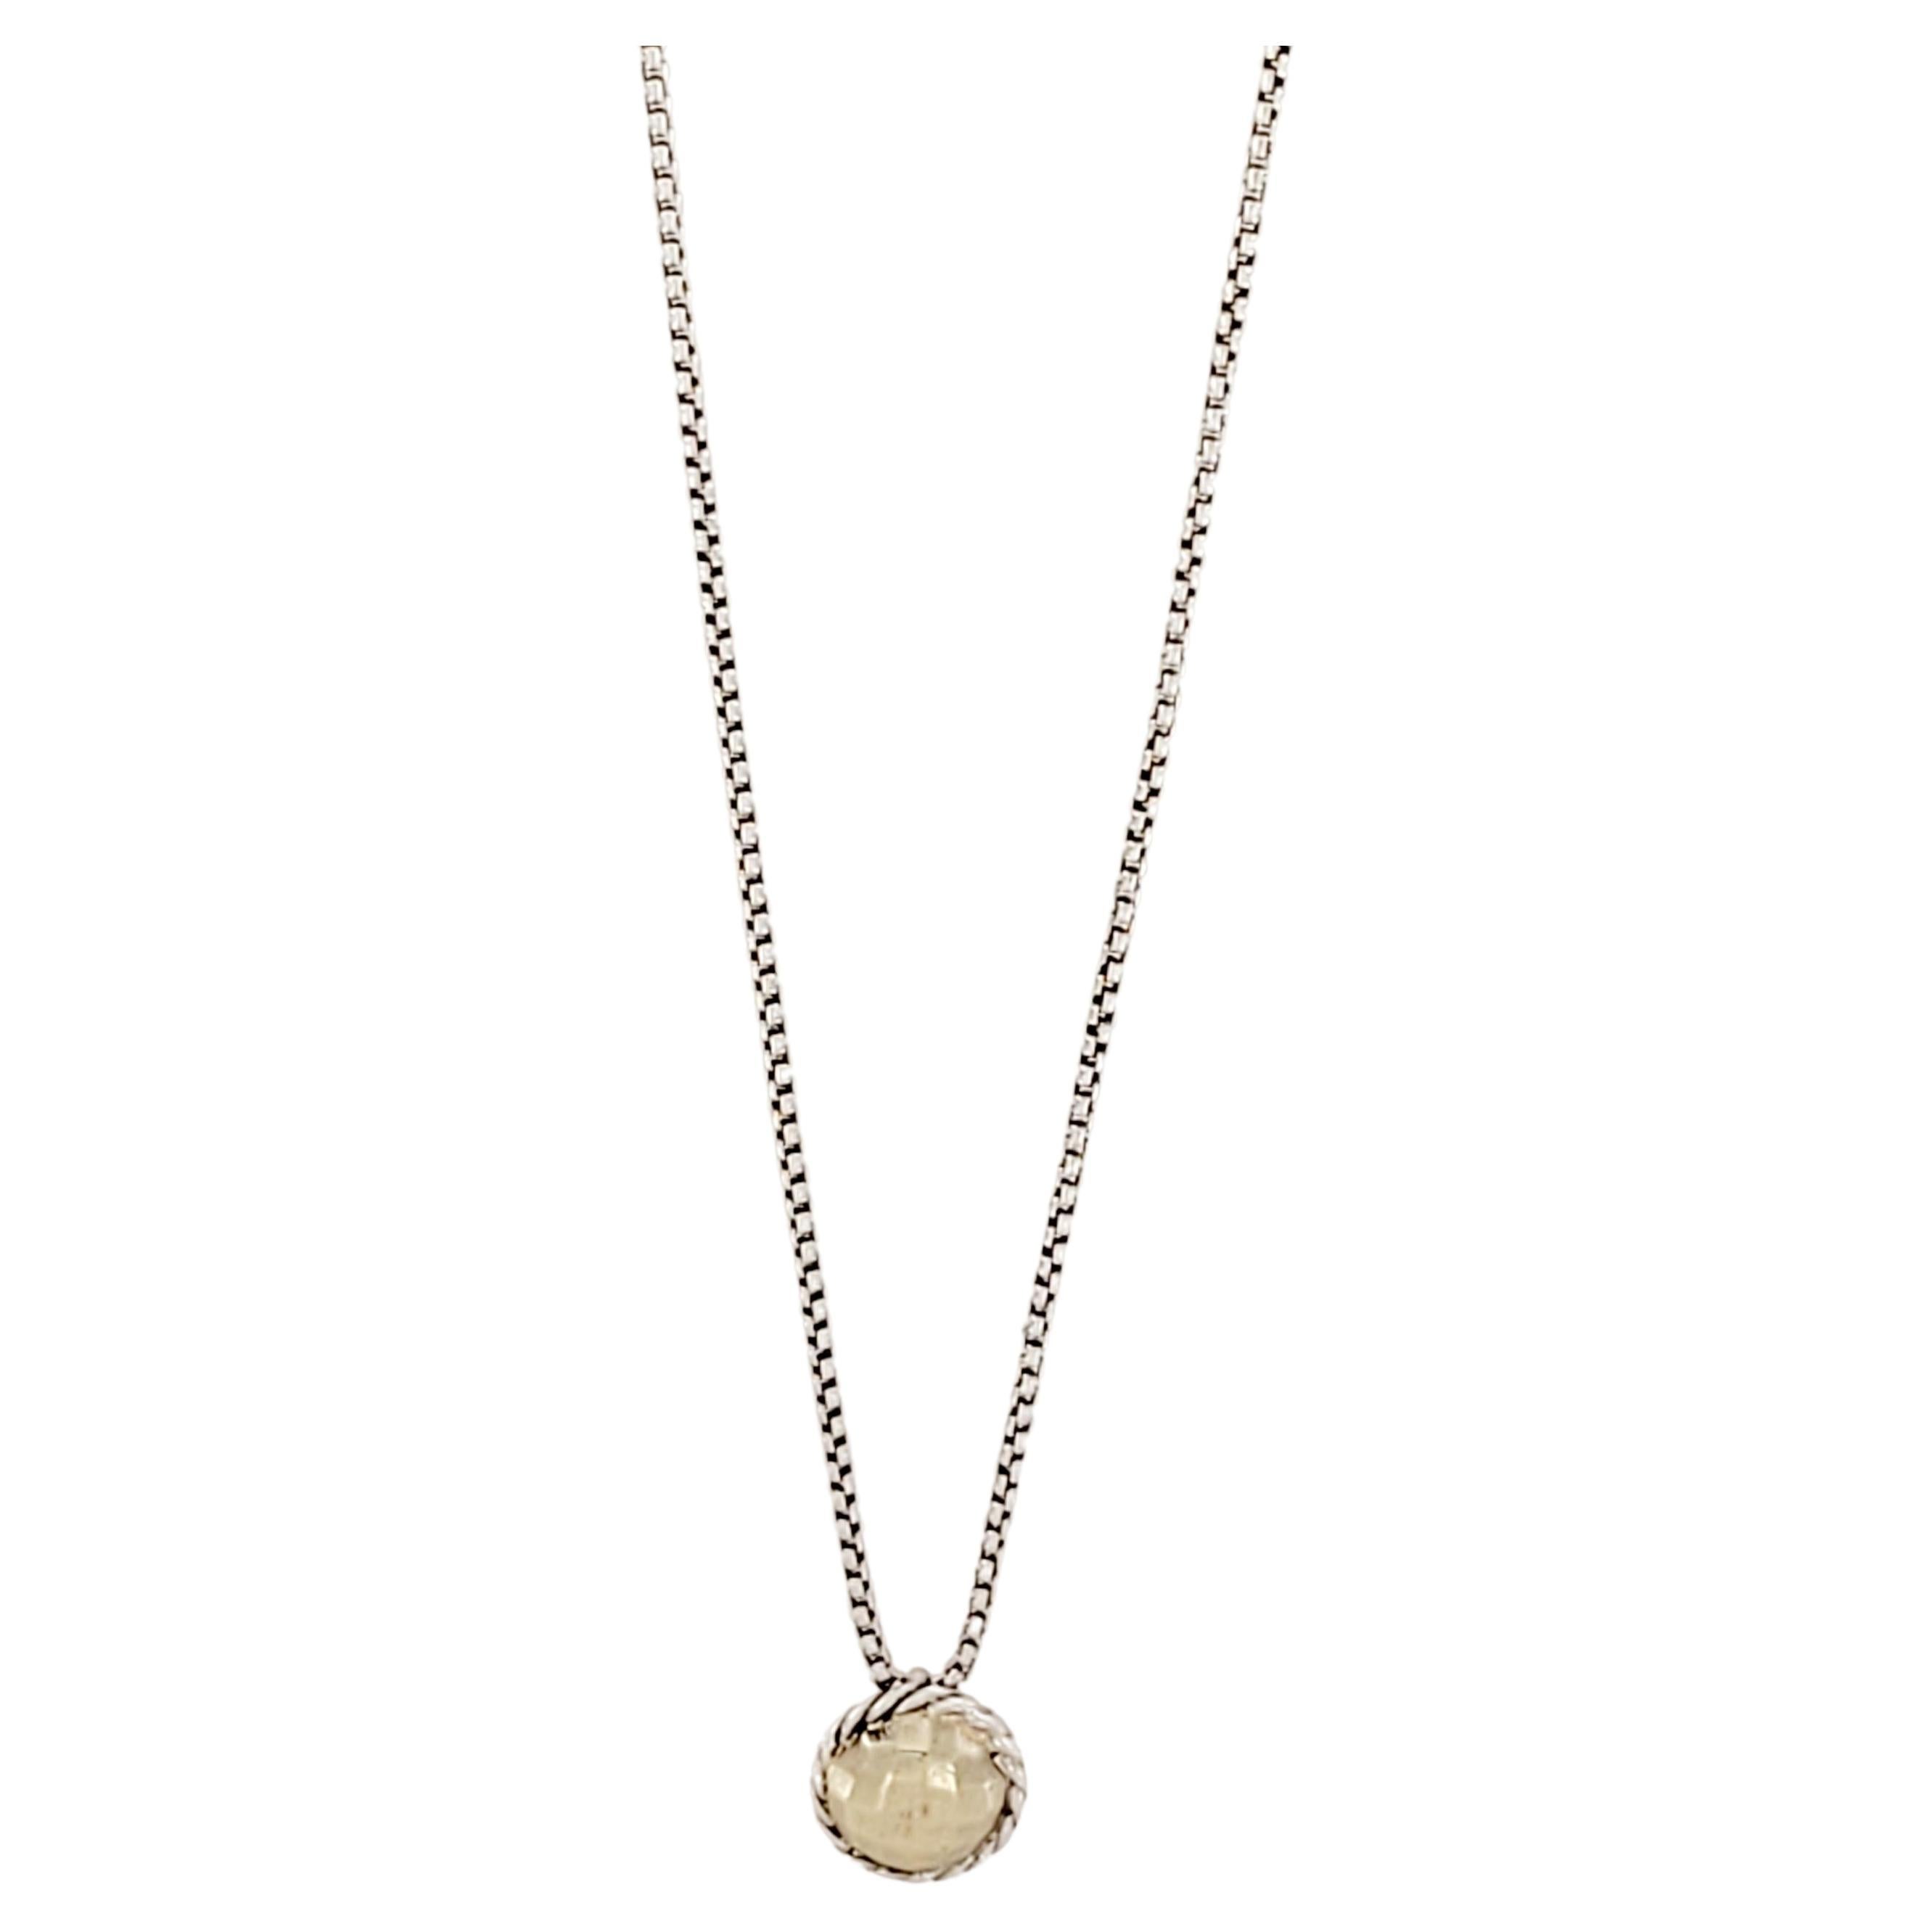 David Yurman Chatelaine Necklace with 18k Gold For Sale